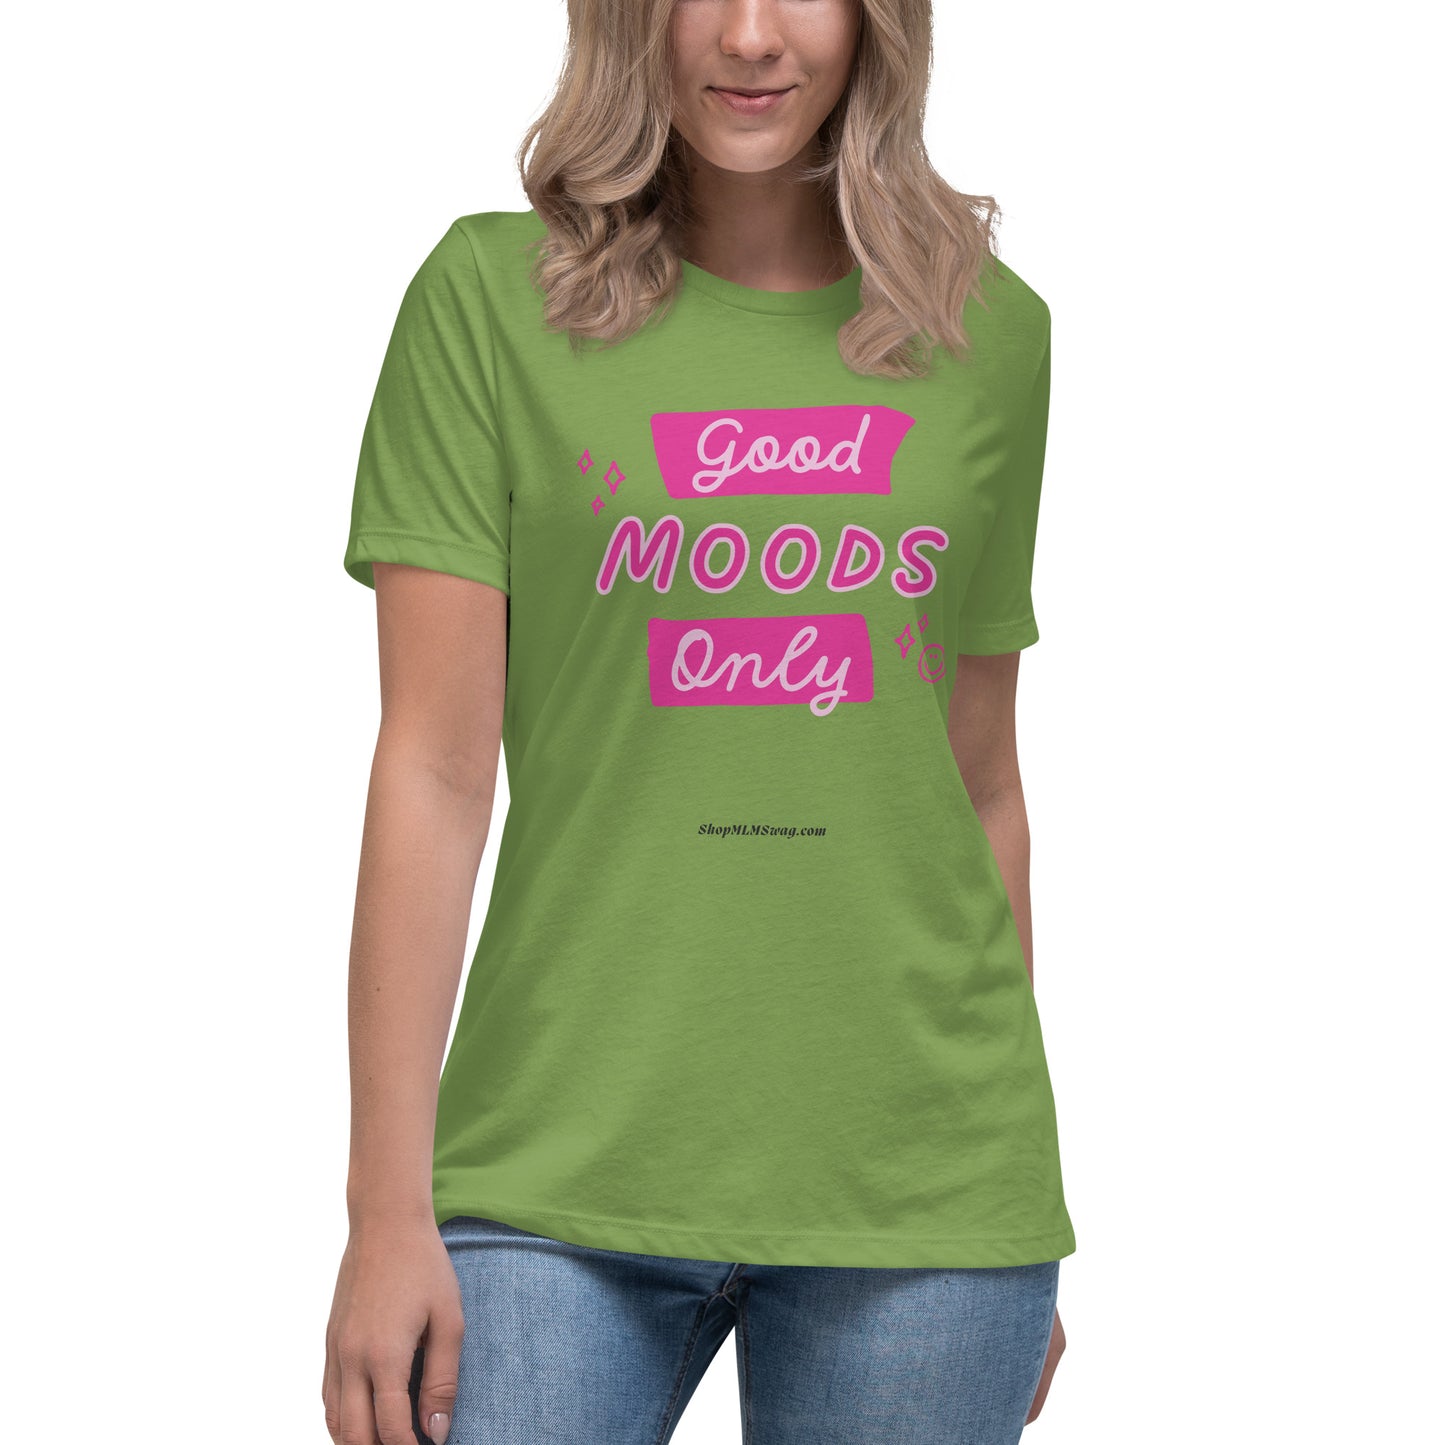 "Good Moods Only" Pink Mood T-Shirt